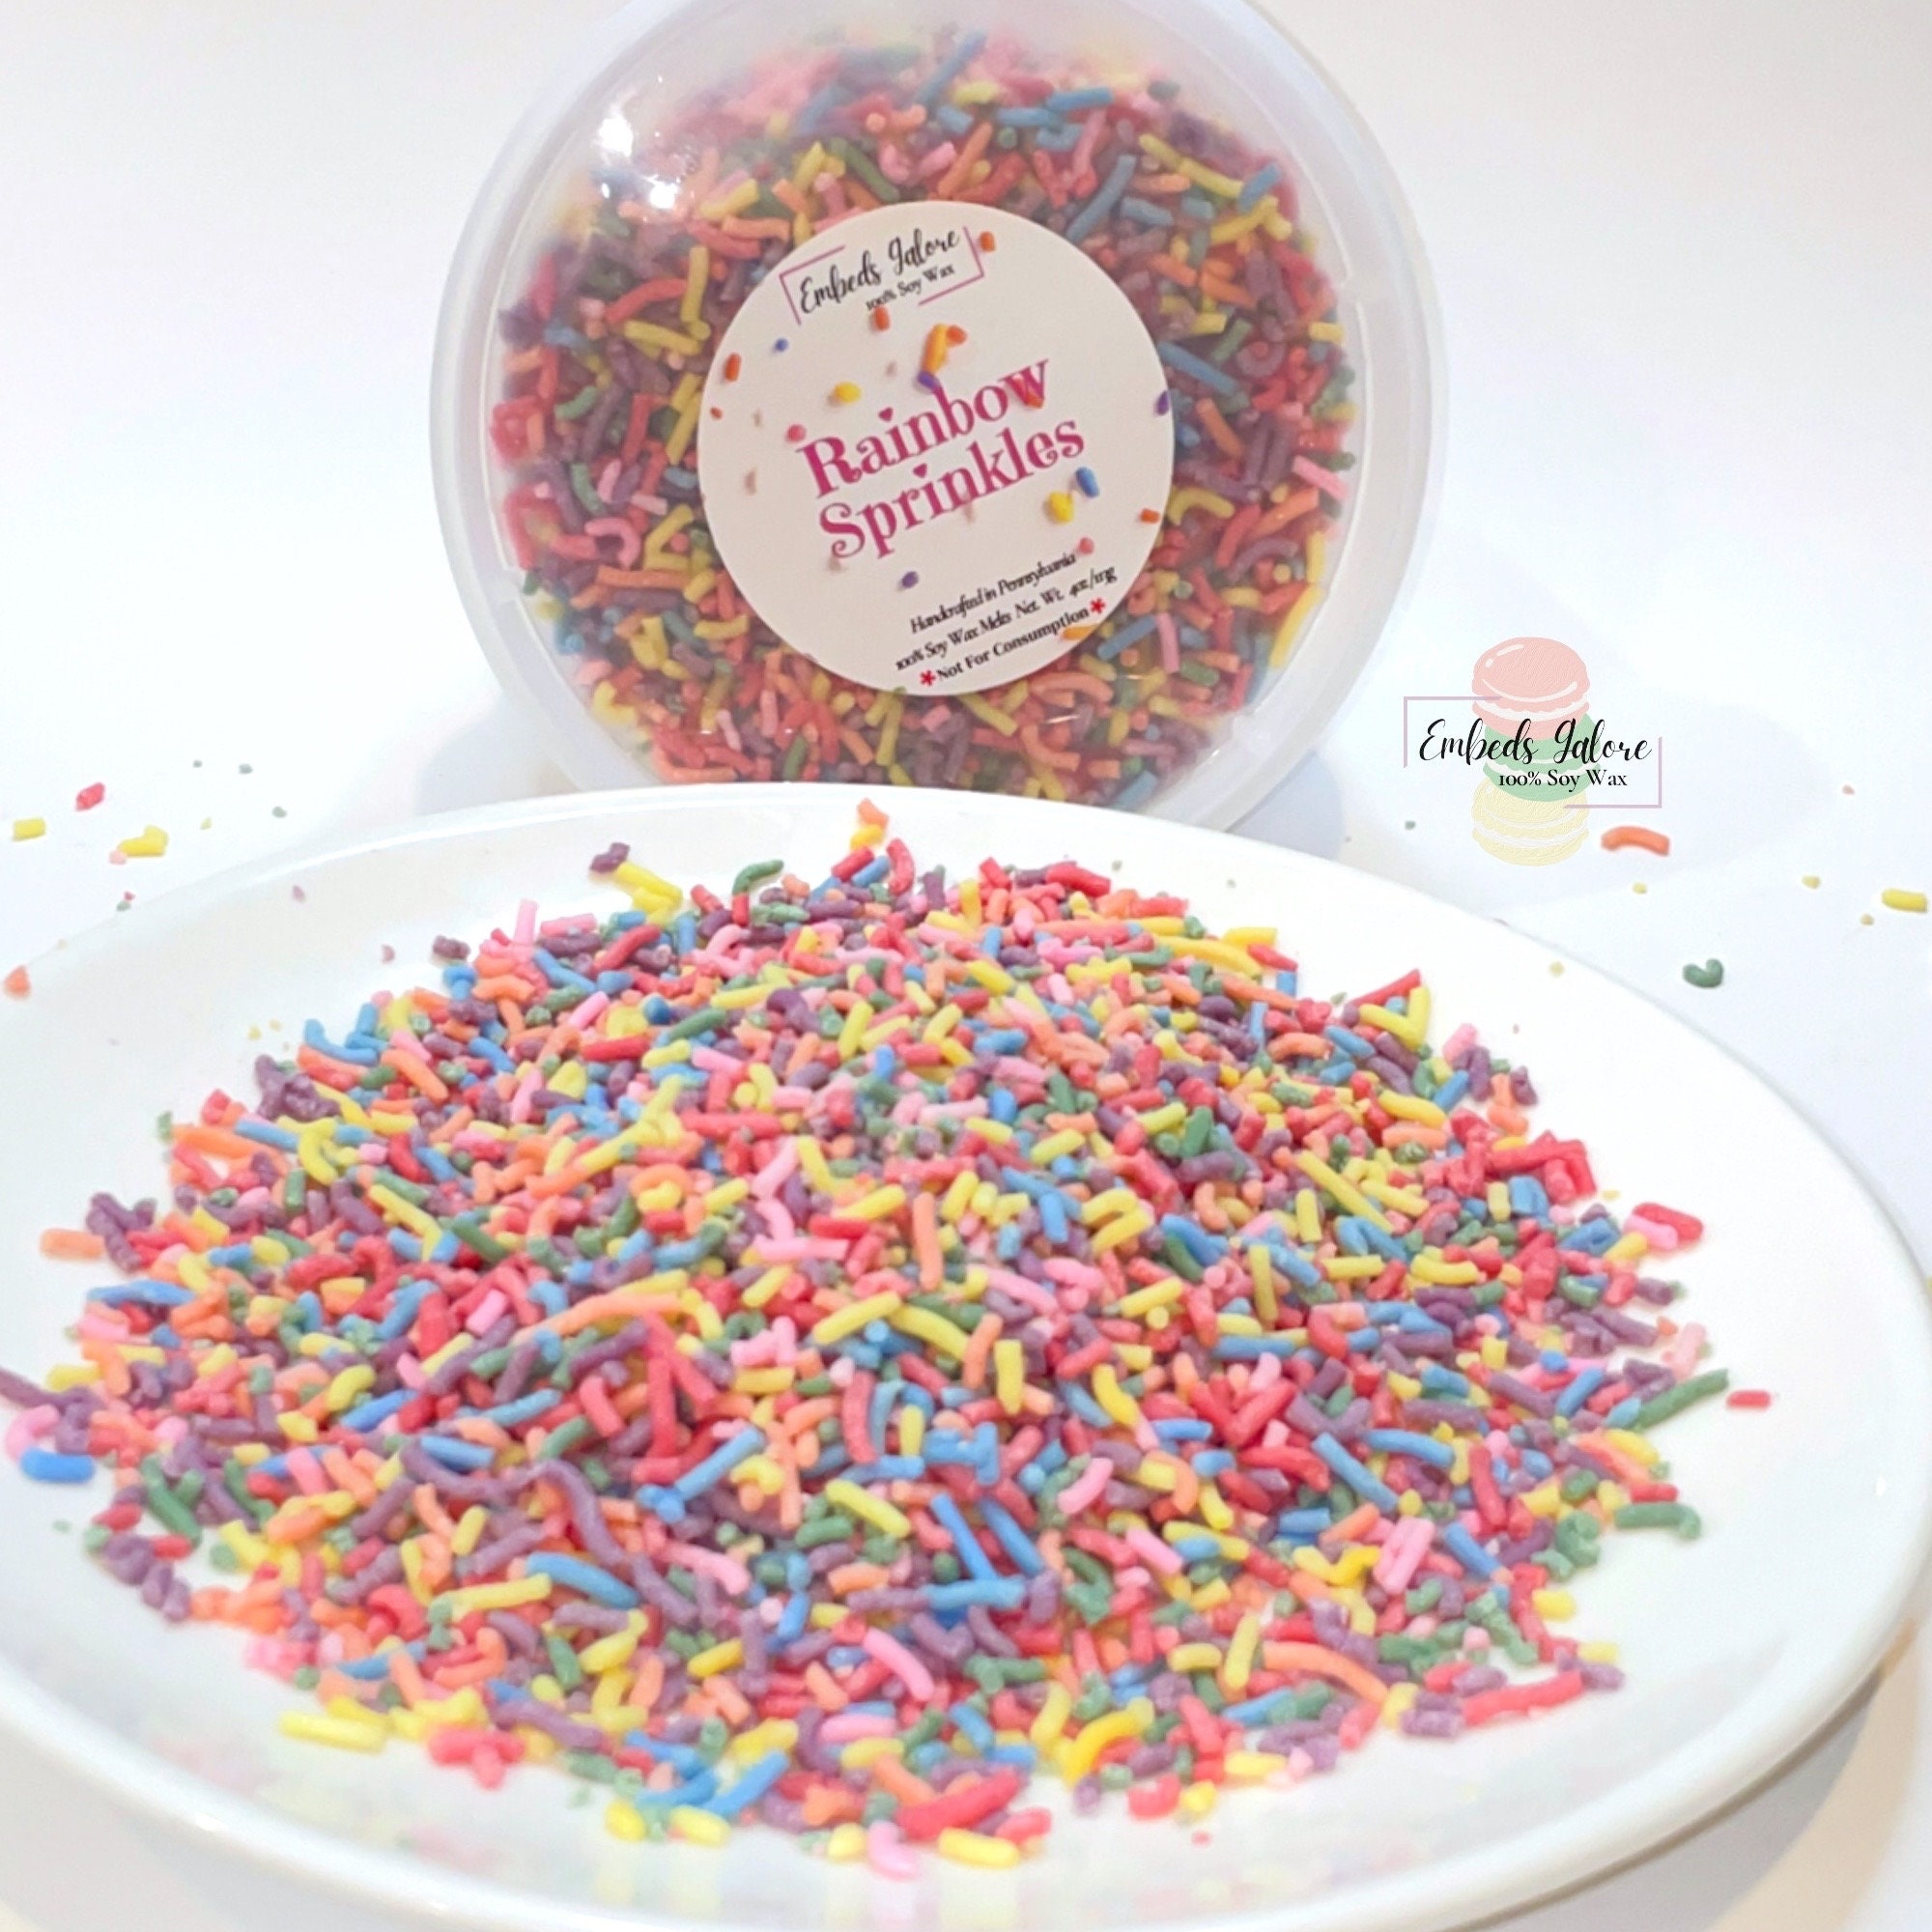 Lisa is a Rainbow, Assorted Sprinkles With Cab, Faux Sprinkles